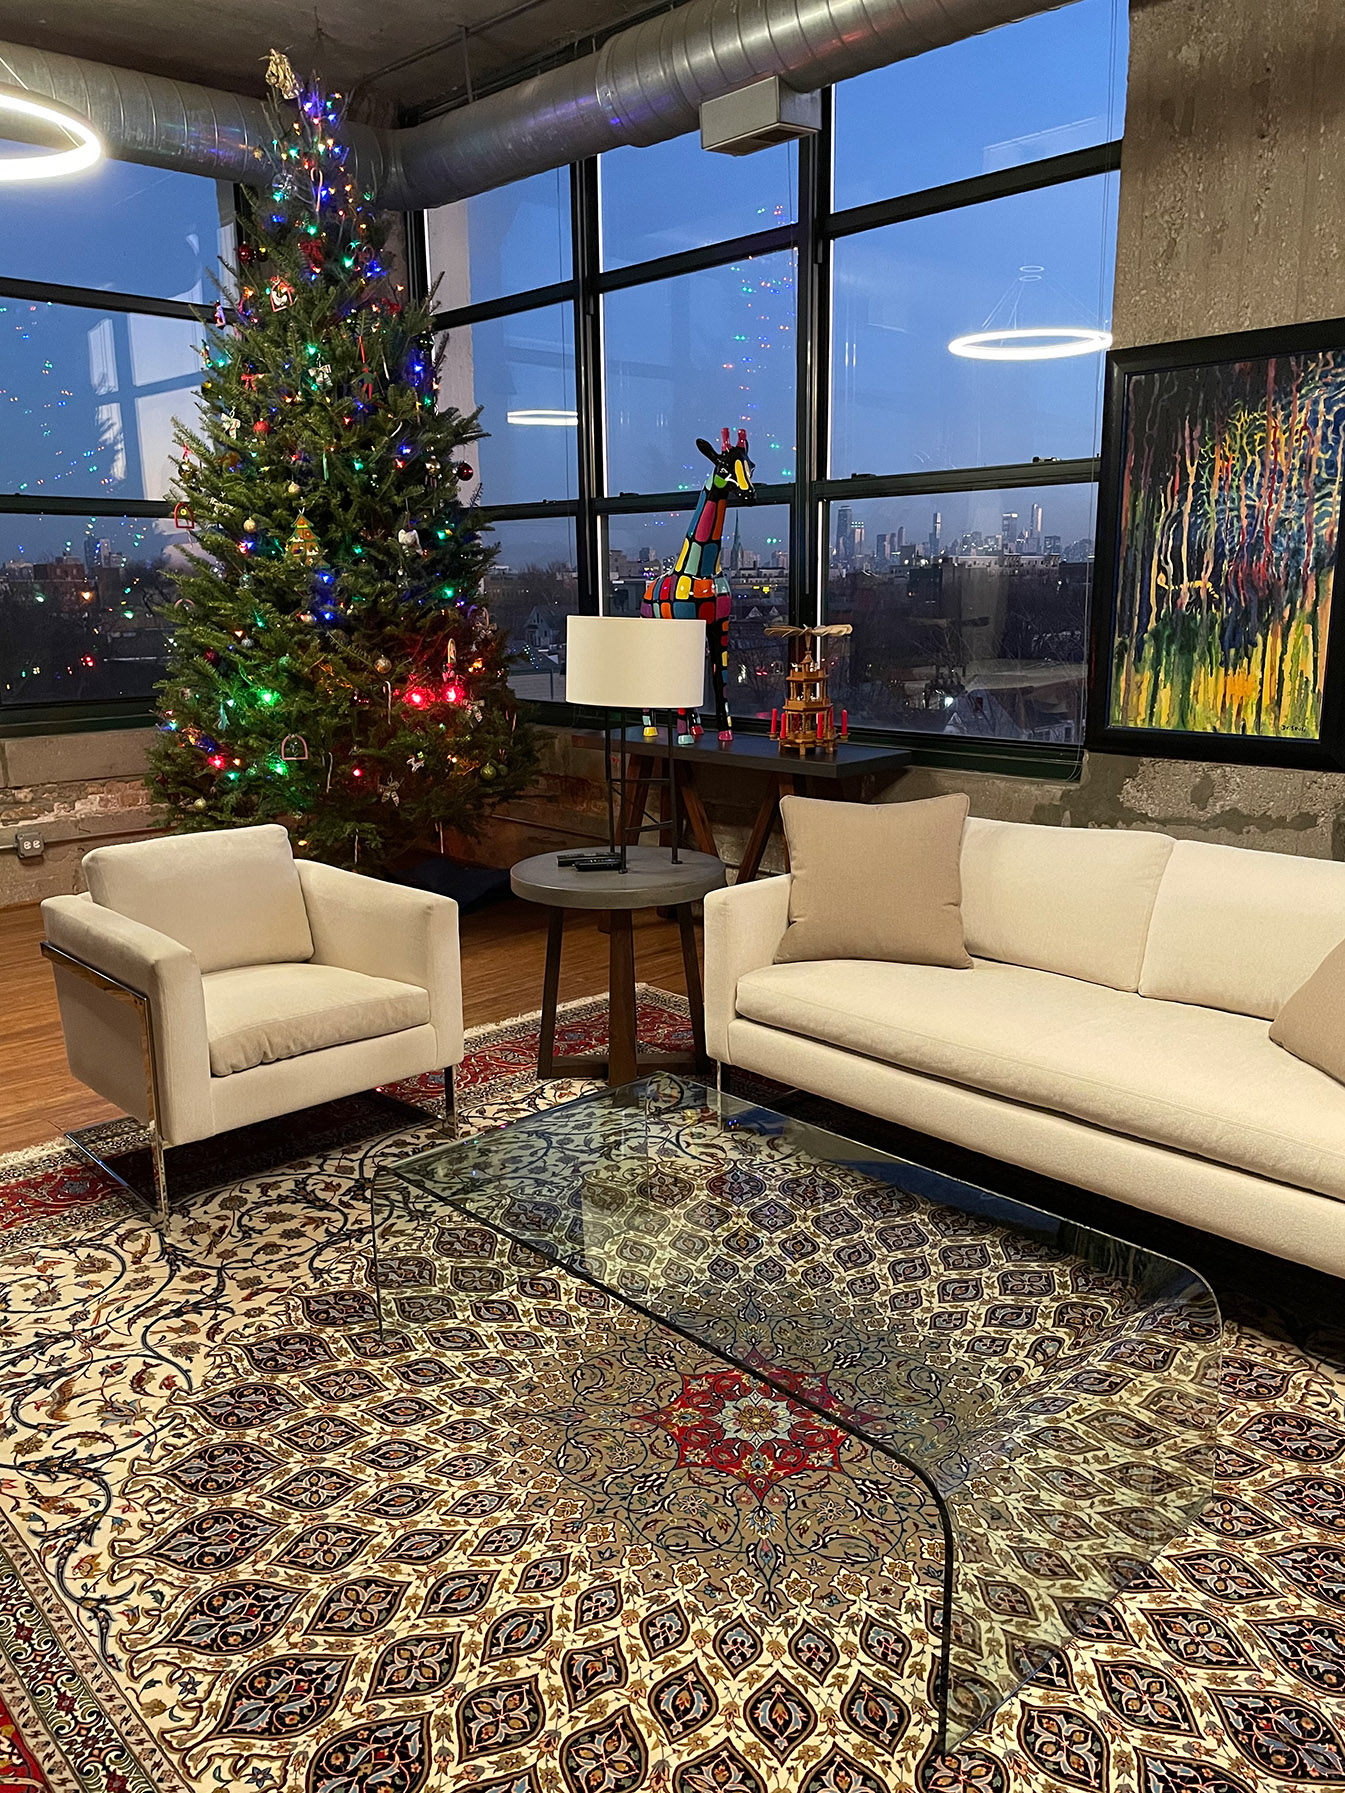 A lining room with a beige Persian rug, glass coffee table and a tall Christmas Tree. High ceiling glas windows